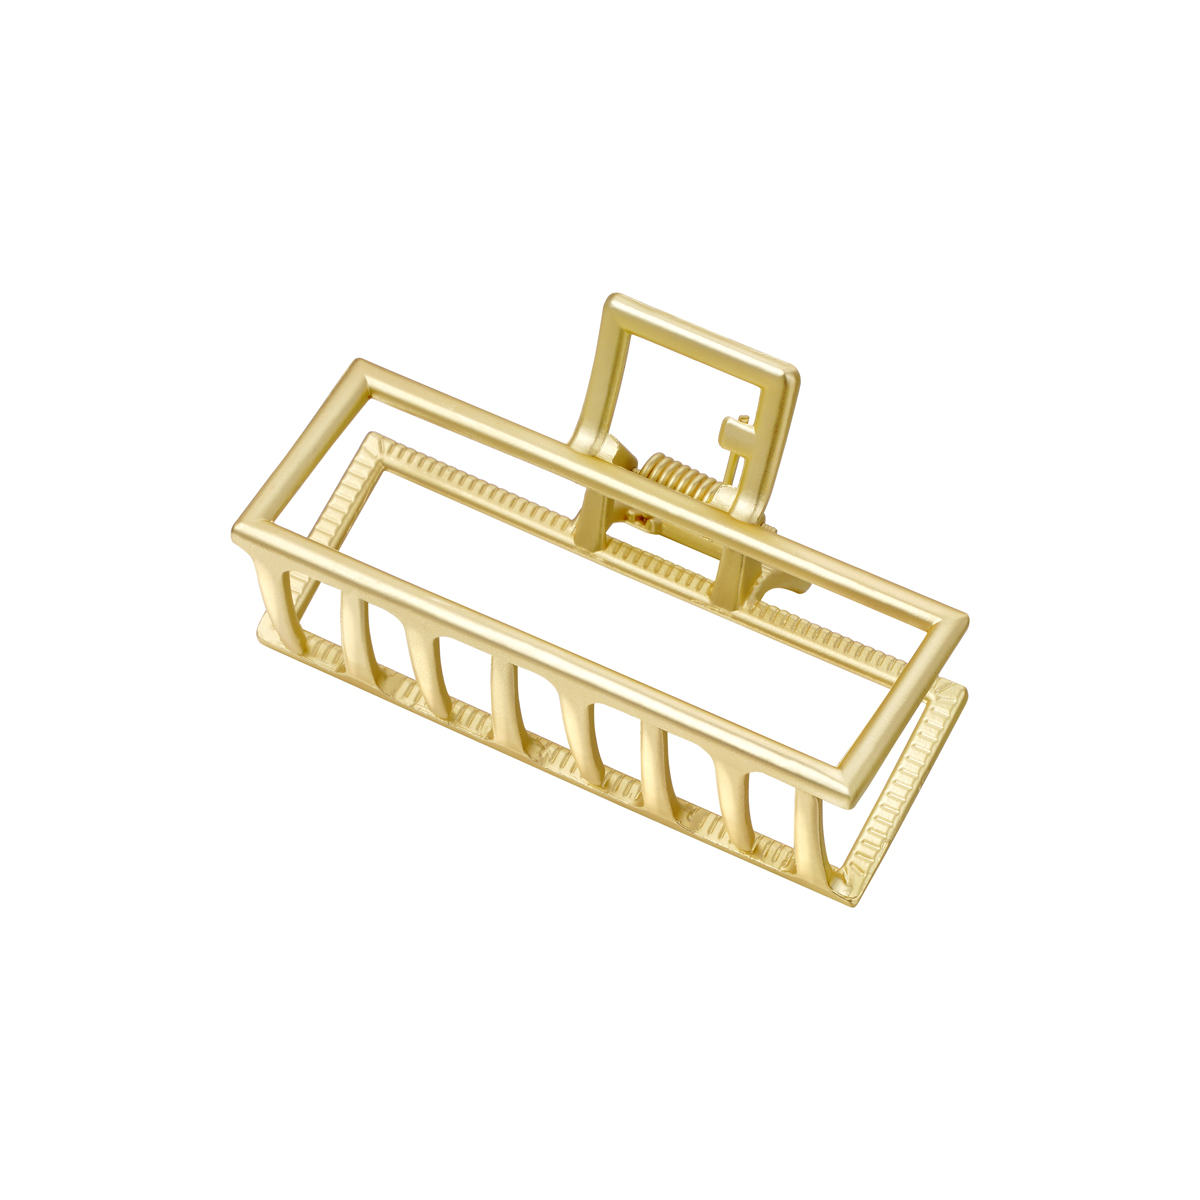 Rectangular shaped metal hair clip in gold color